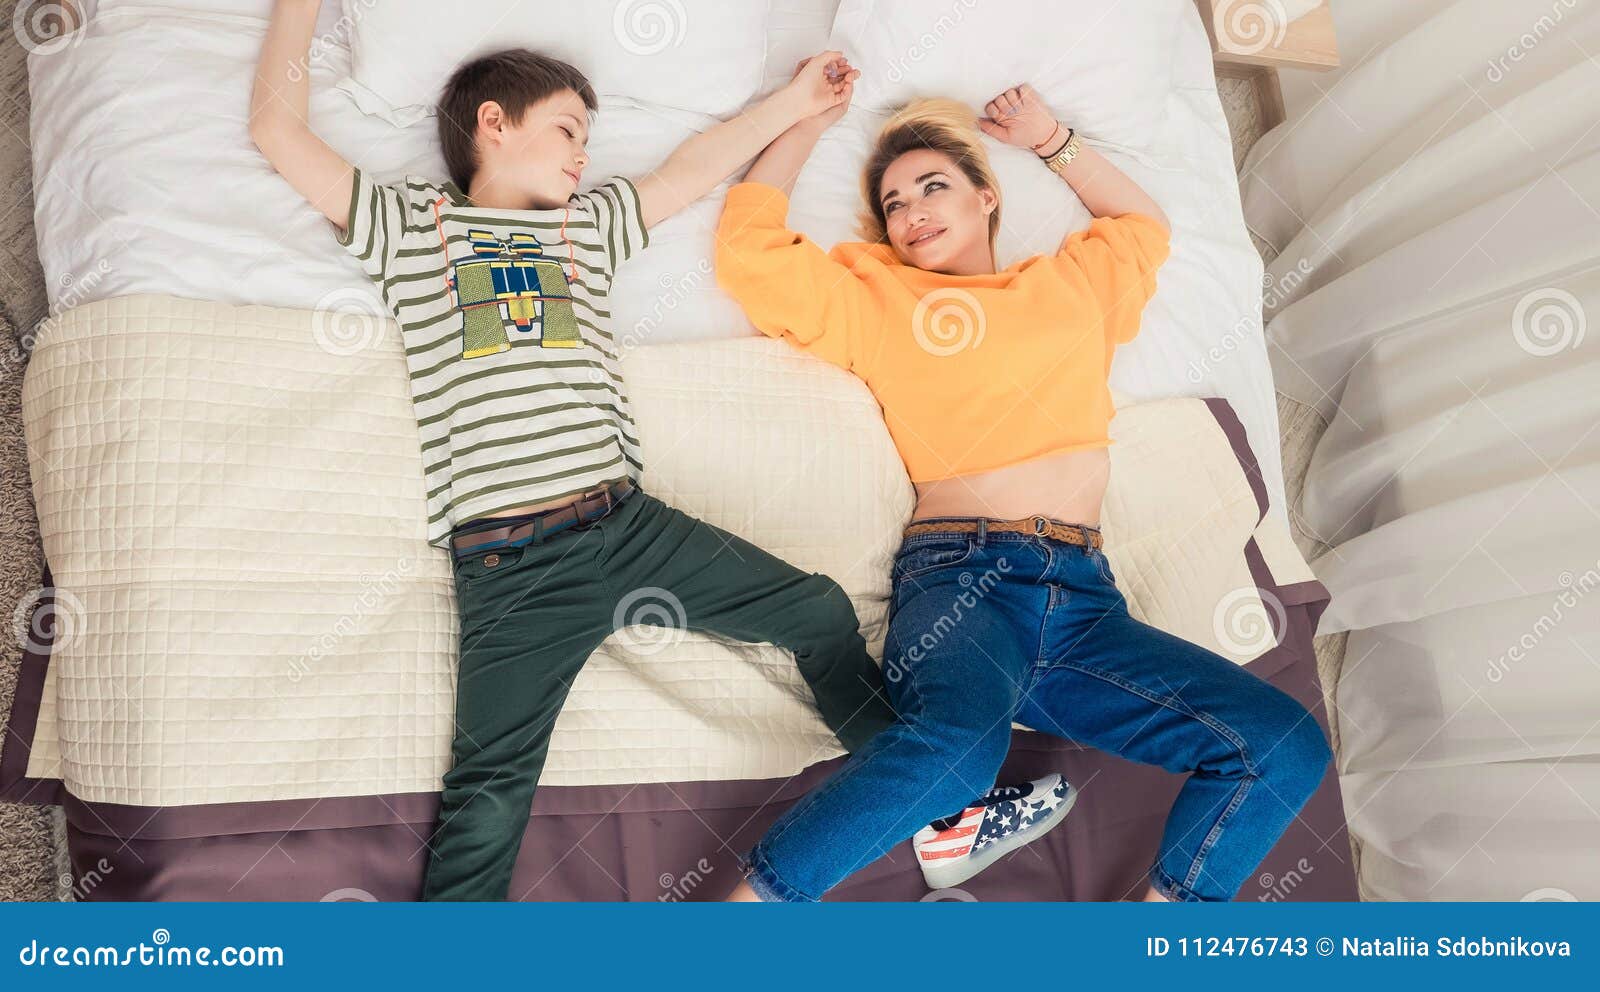 Mother With Son On Bed Mother And Son Having Fun Stock Image Image